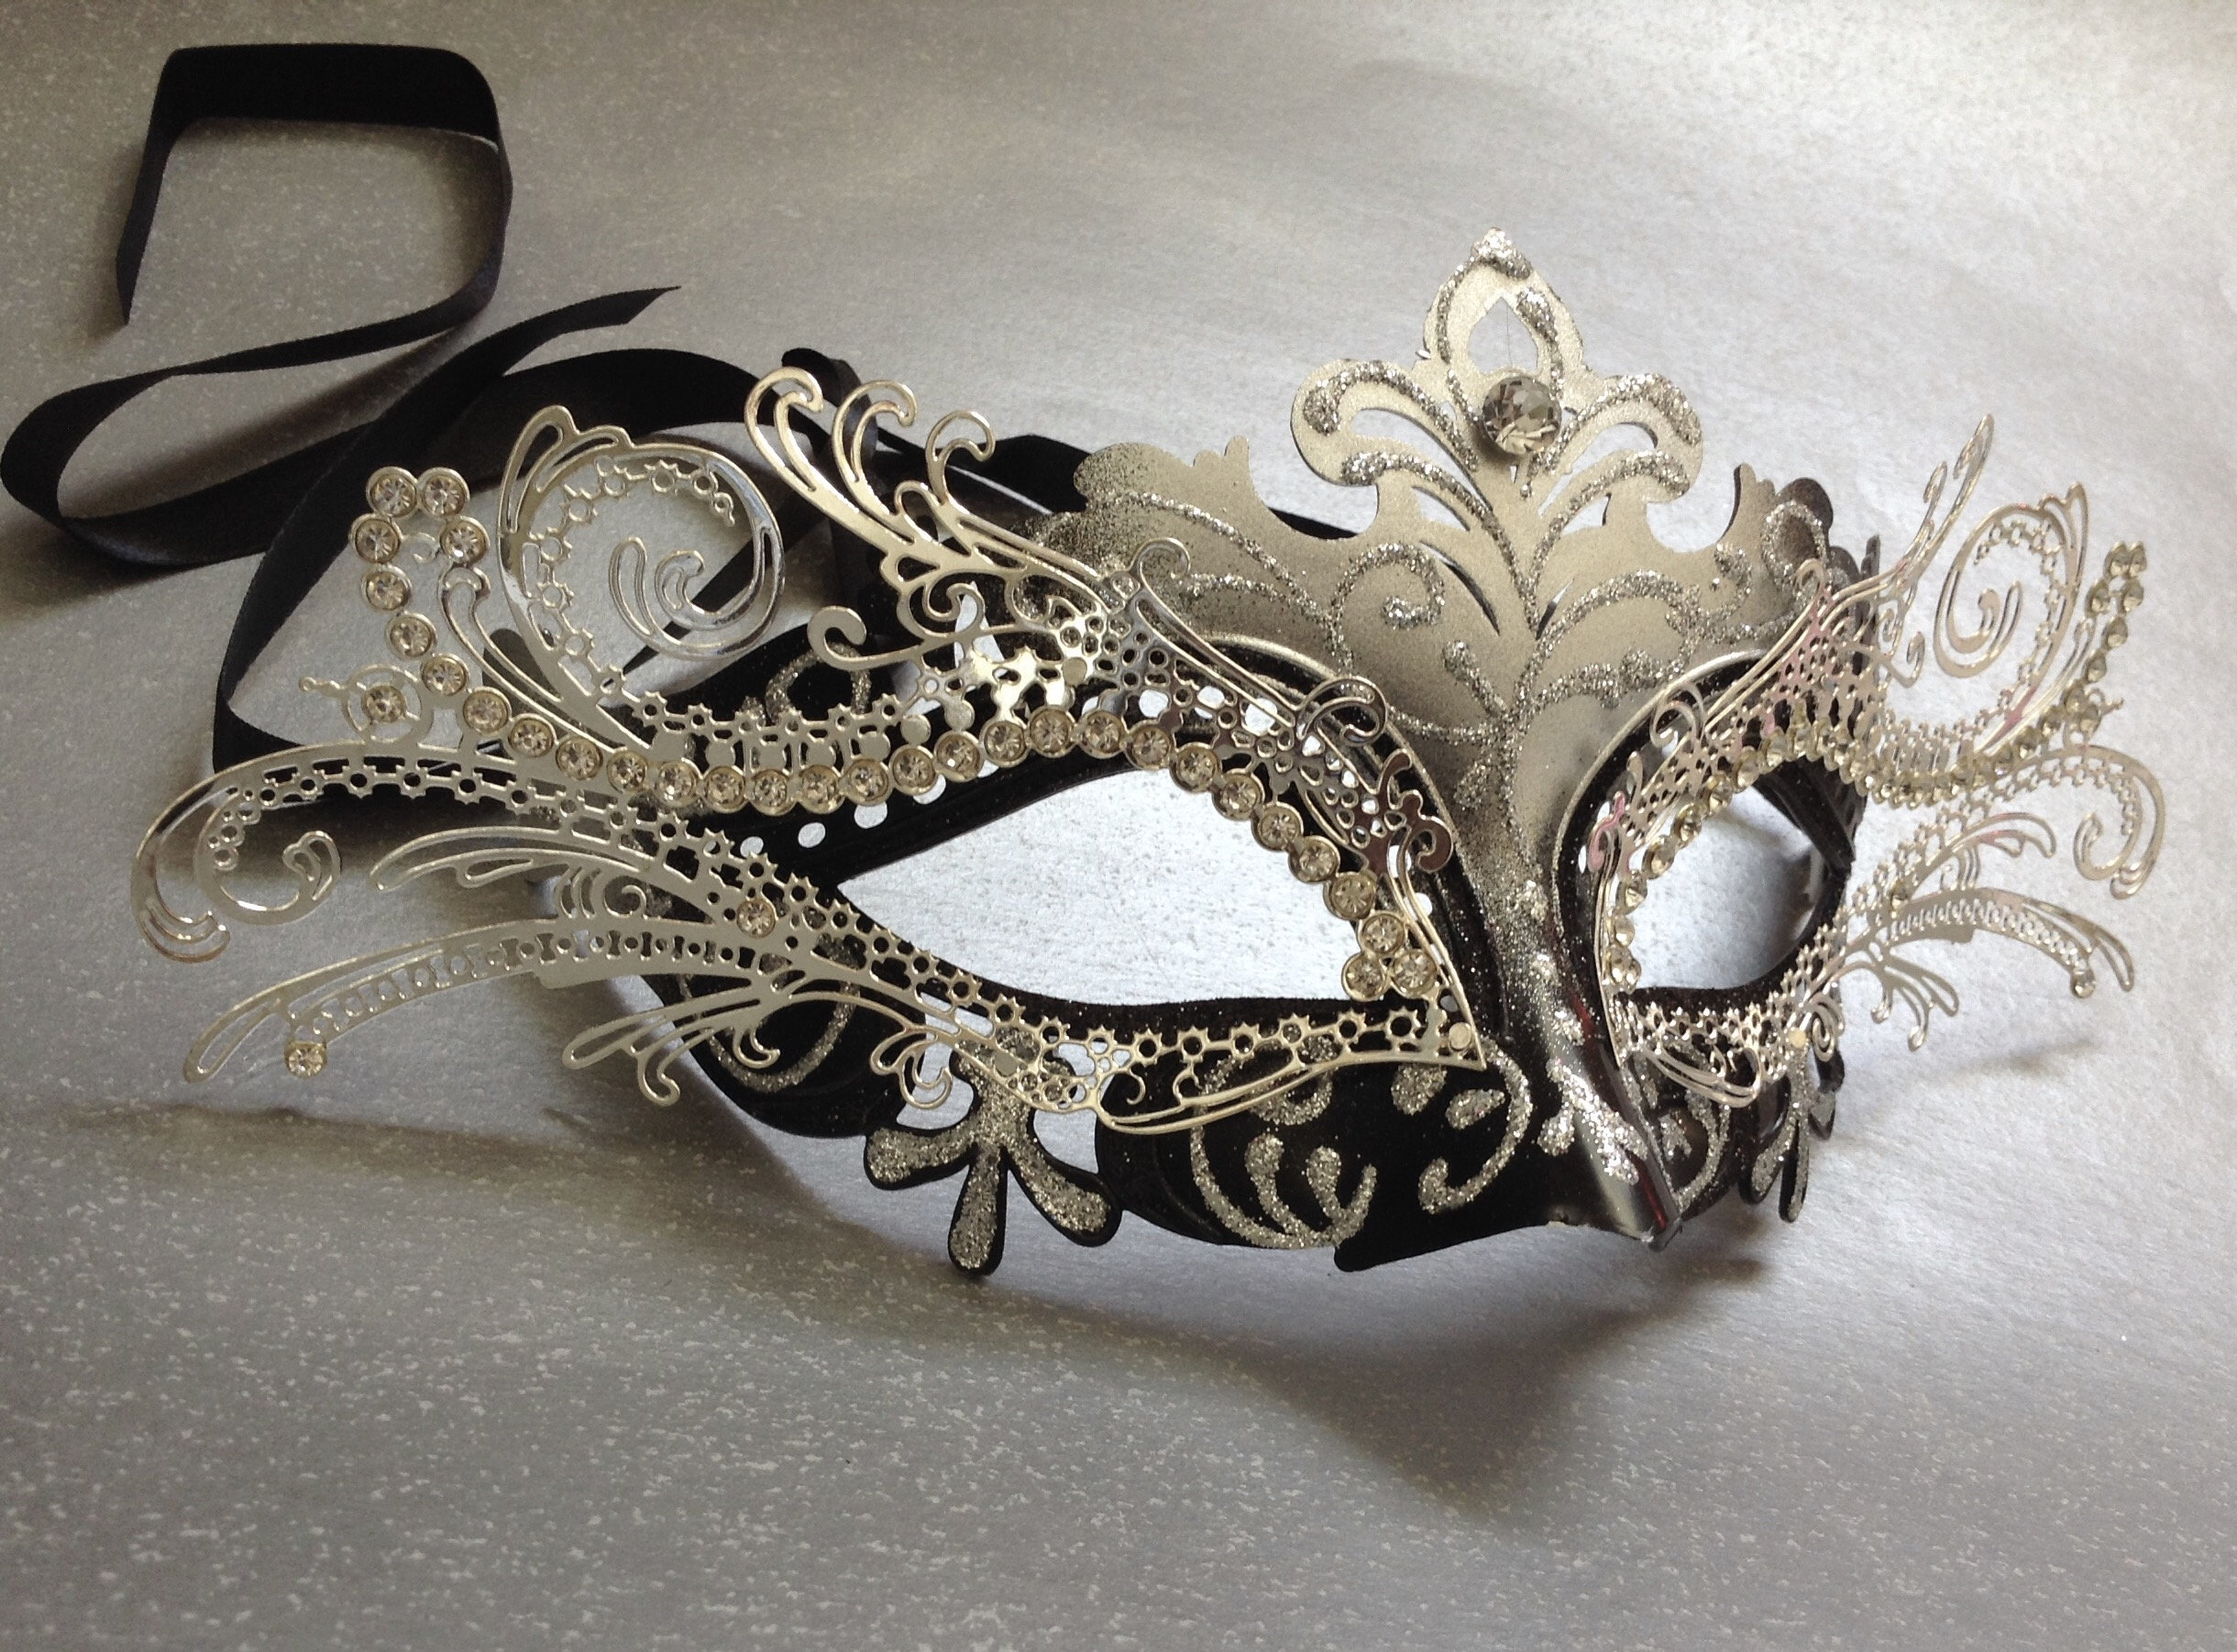 Get Masquerade Ball Eye Mask From Expert Companies | Book Your Orders